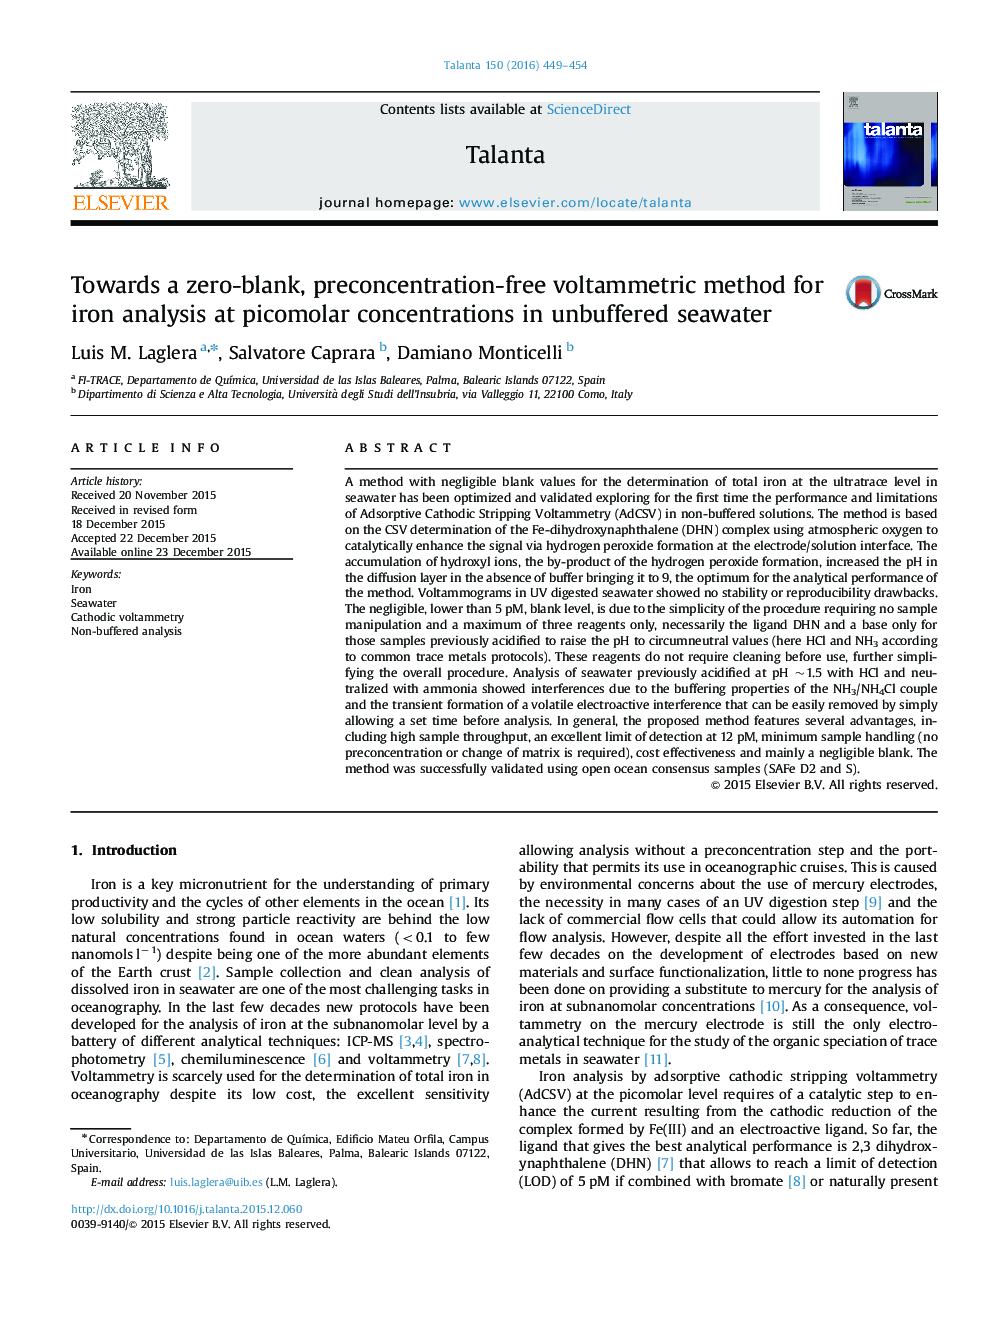 Towards a zero-blank, preconcentration-free voltammetric method for iron analysis at picomolar concentrations in unbuffered seawater